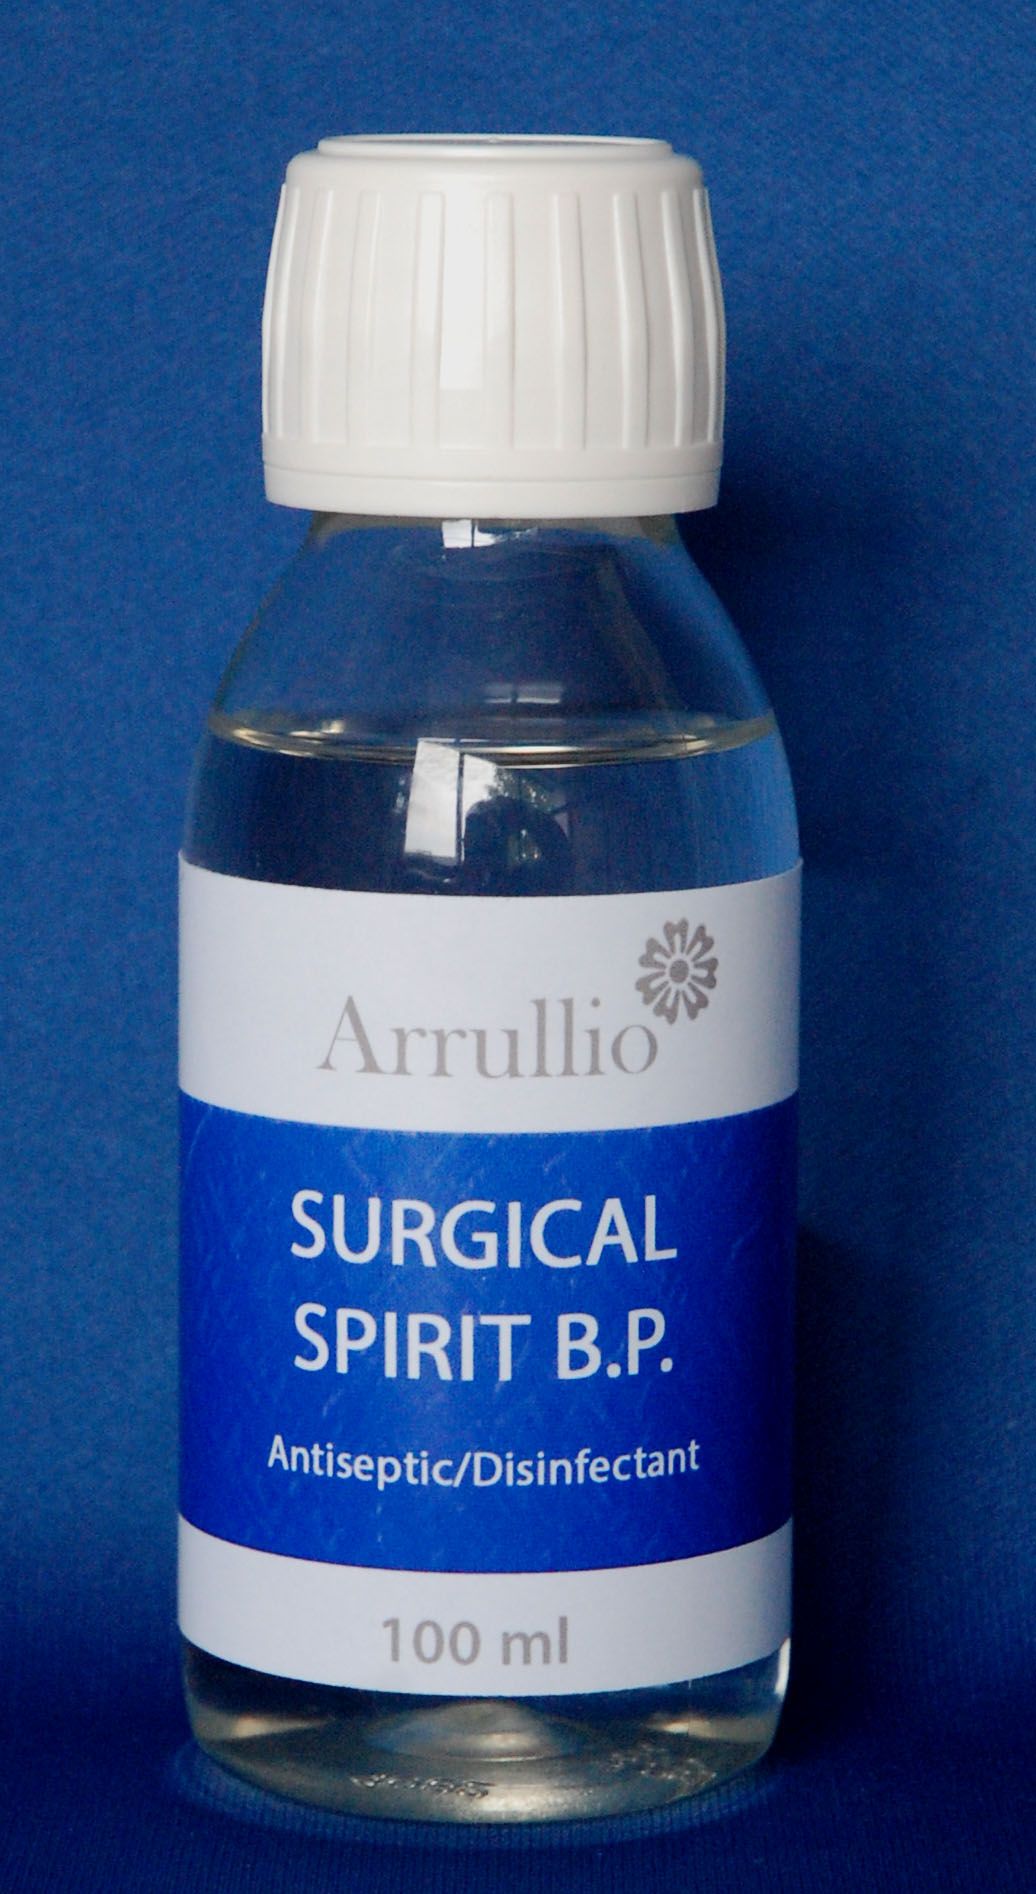 What are surgical spirit uses?